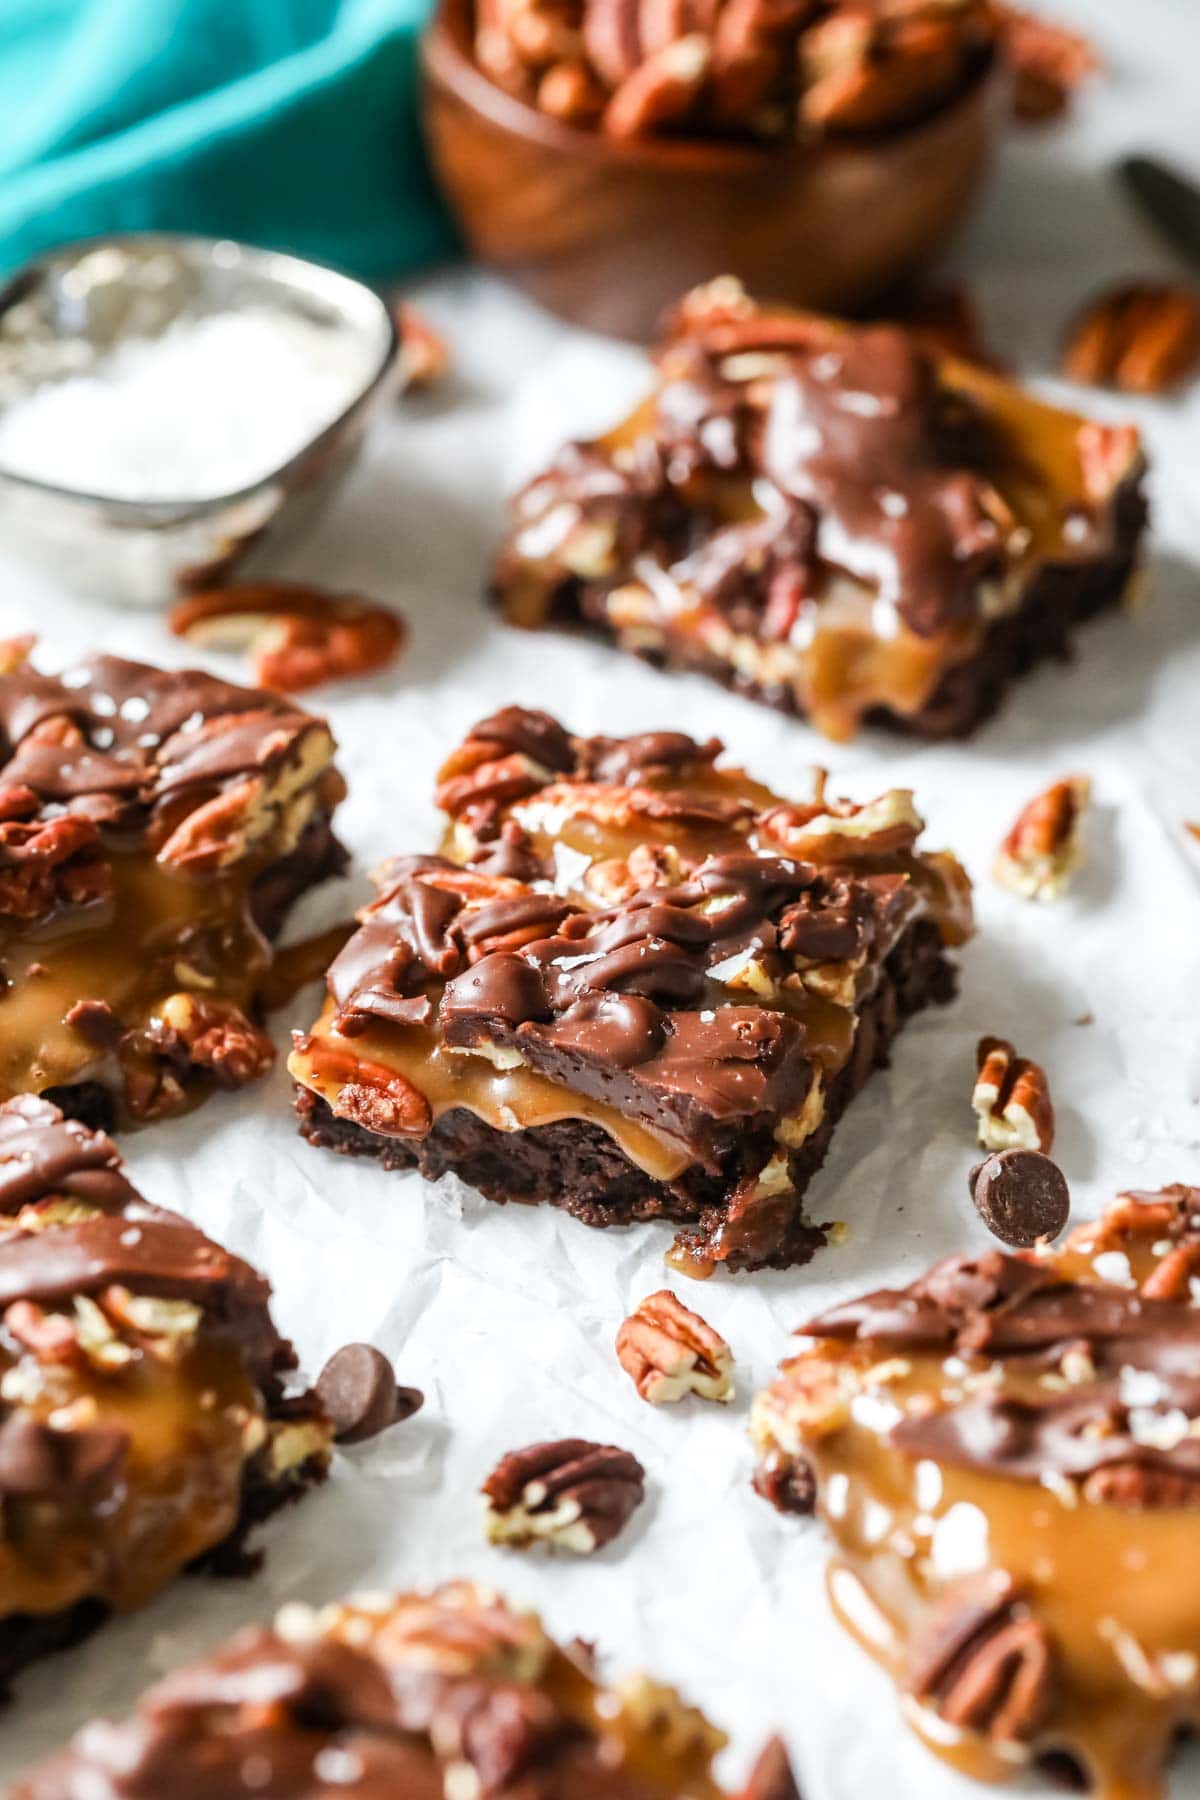 Turtle brownies made with homemade caramel, pecans, a chocolate drizzle, and sea salt.